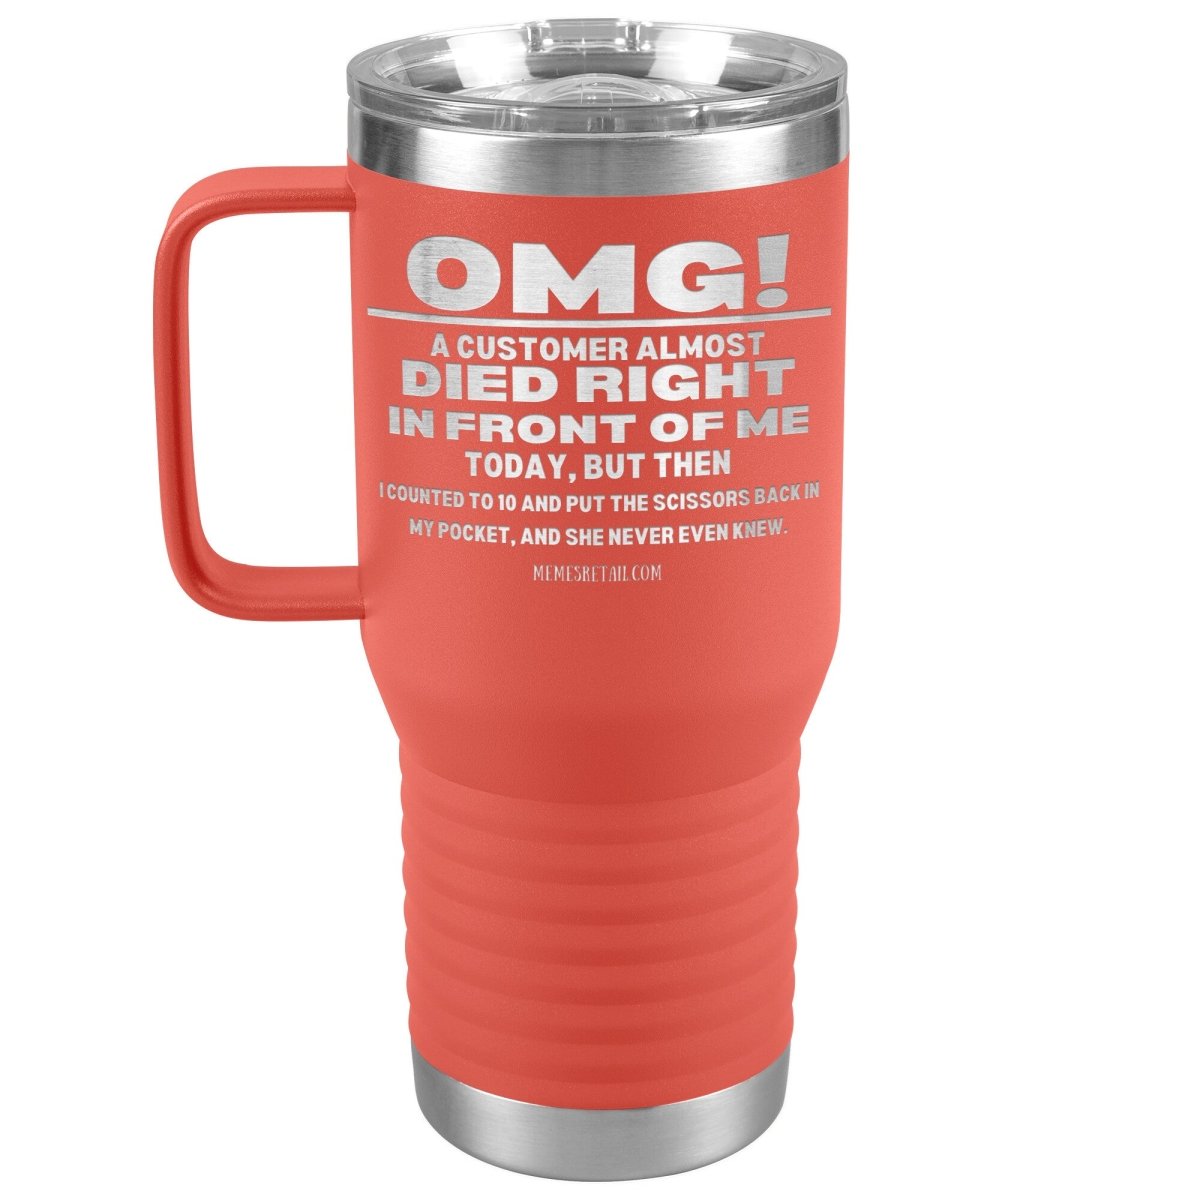 OMG! A Customer Almost Died Right In Front Of Me Tumbler, 20oz Travel Tumbler / Coral - MemesRetail.com